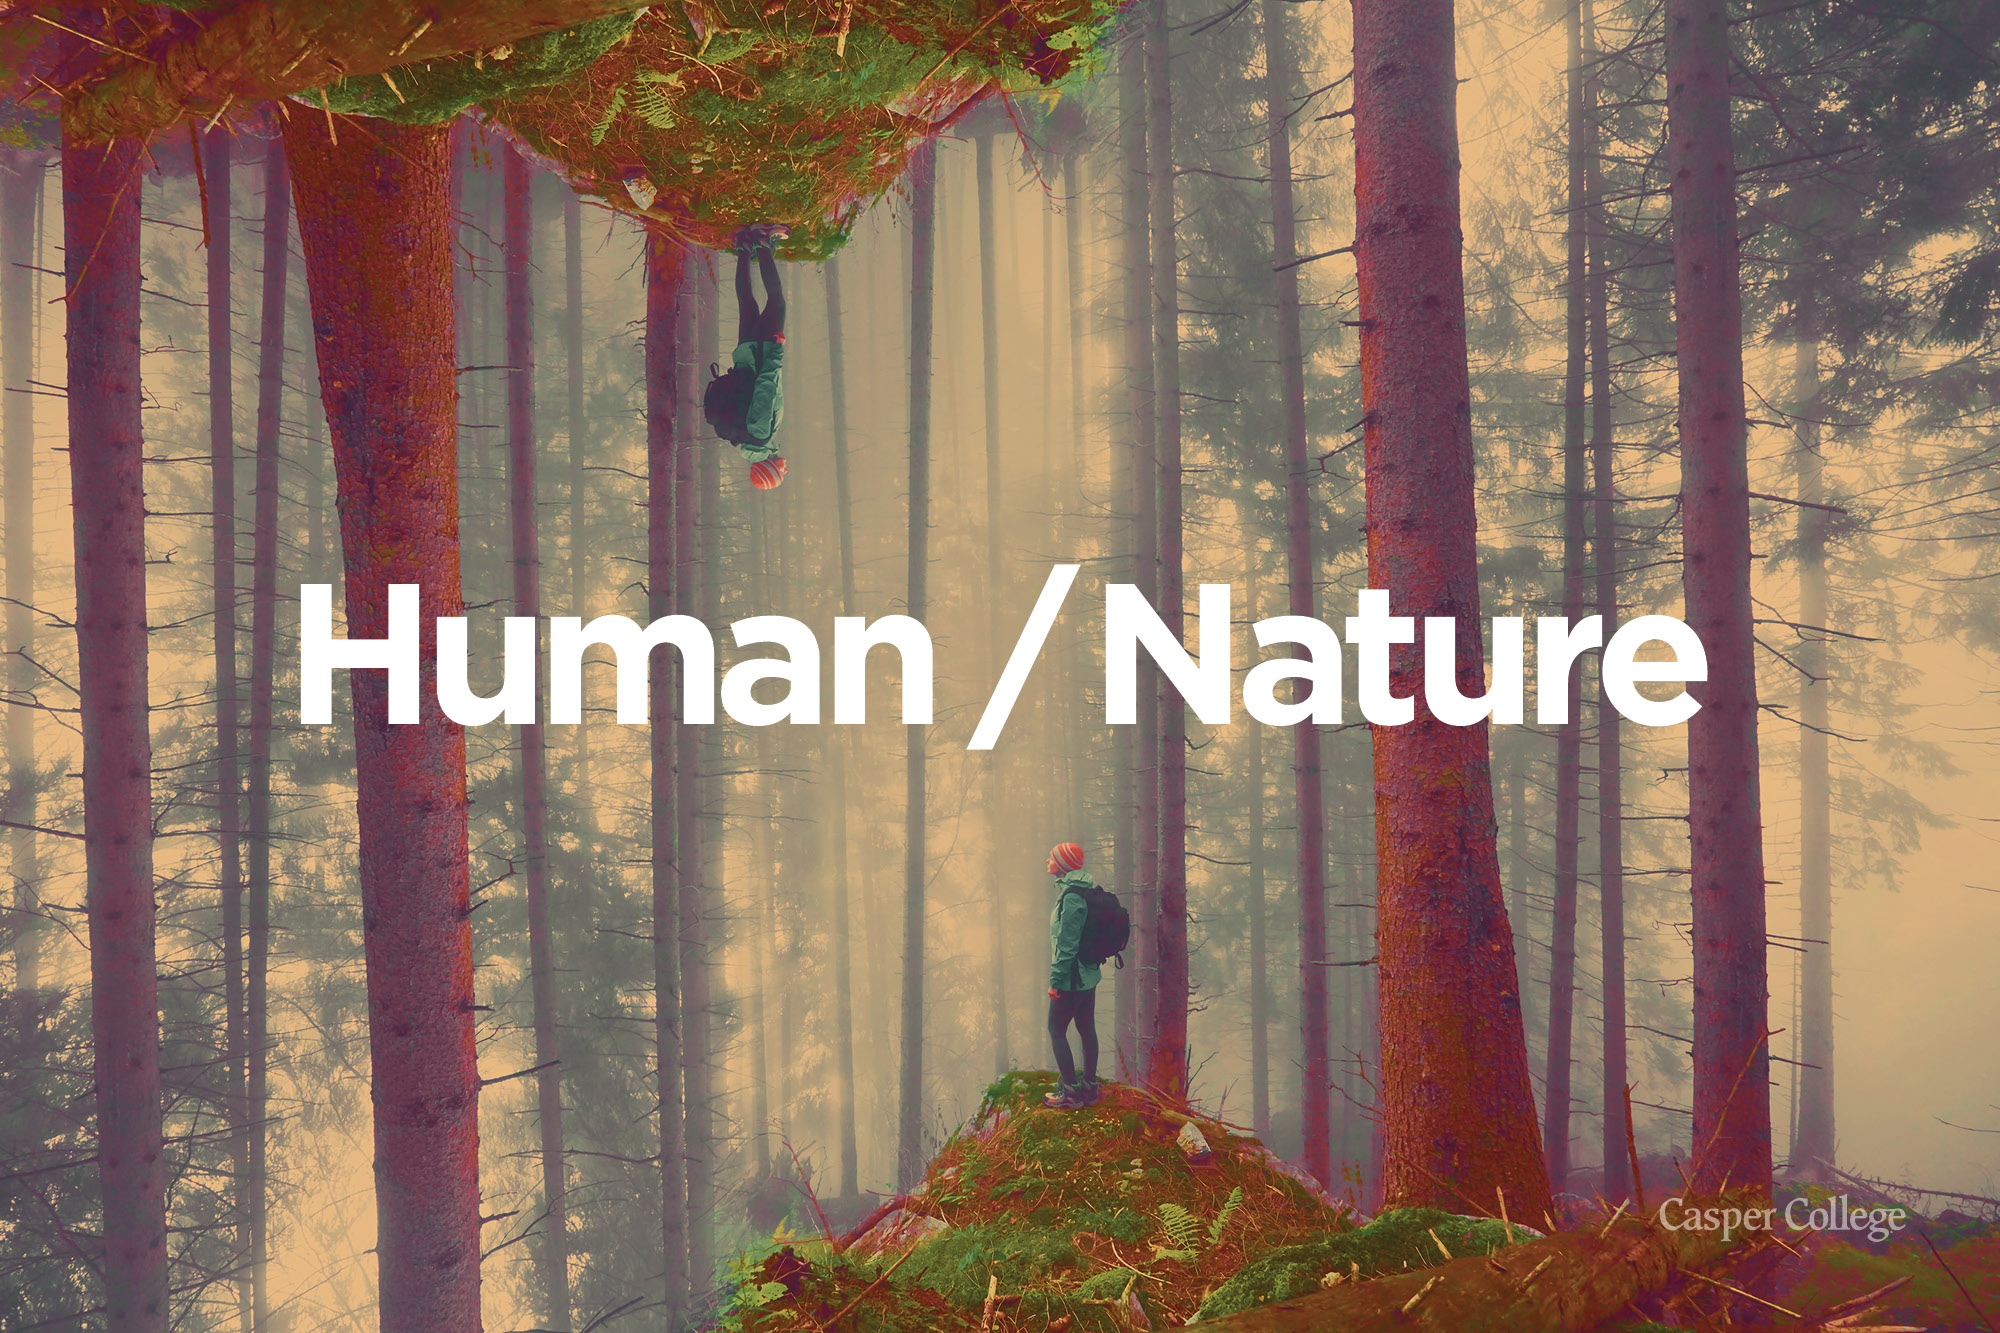 humanities festival human / nature graphic